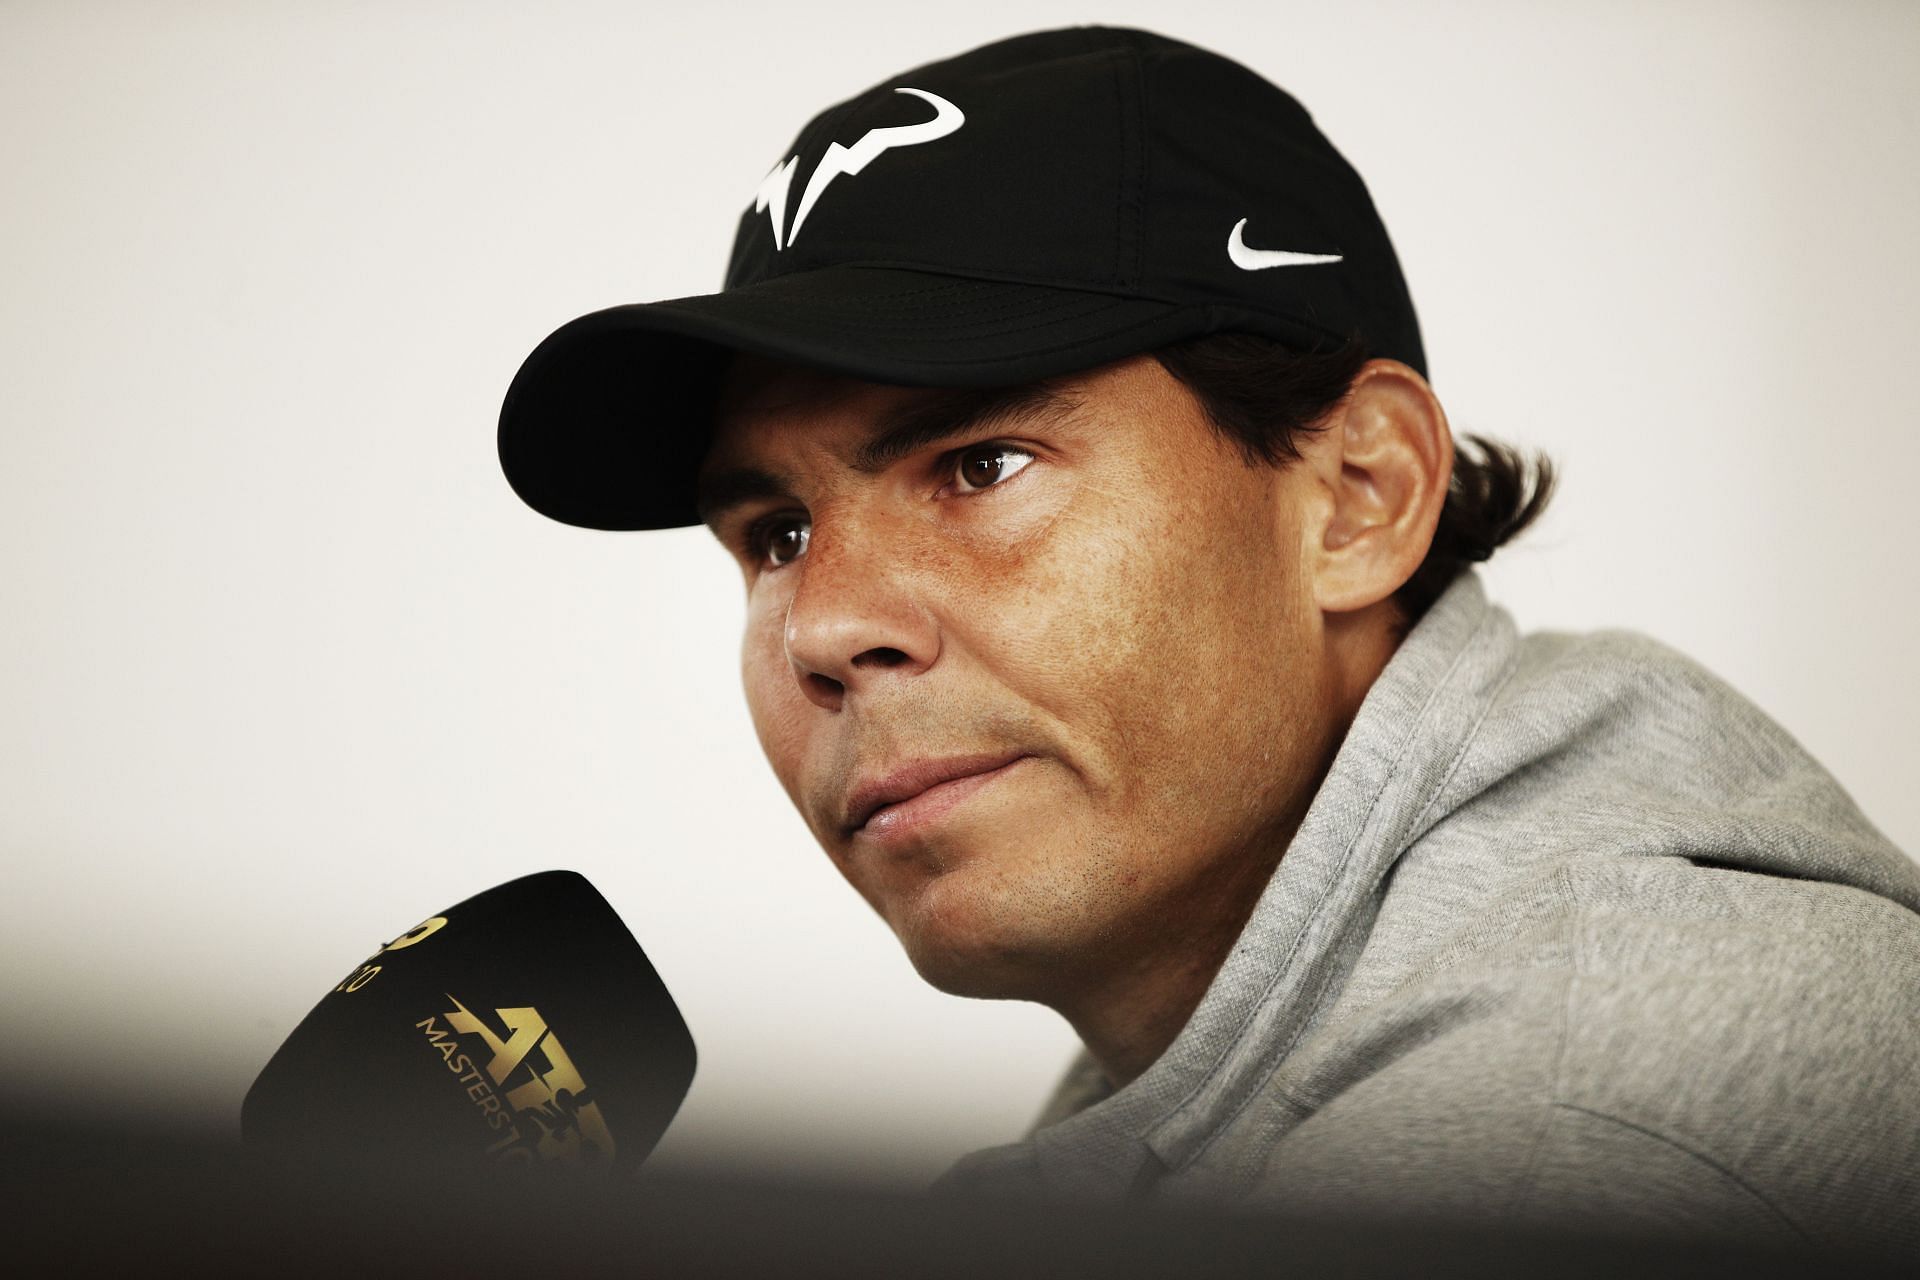 Rafael Nadal held the World No.1 spot for 209 weeks.